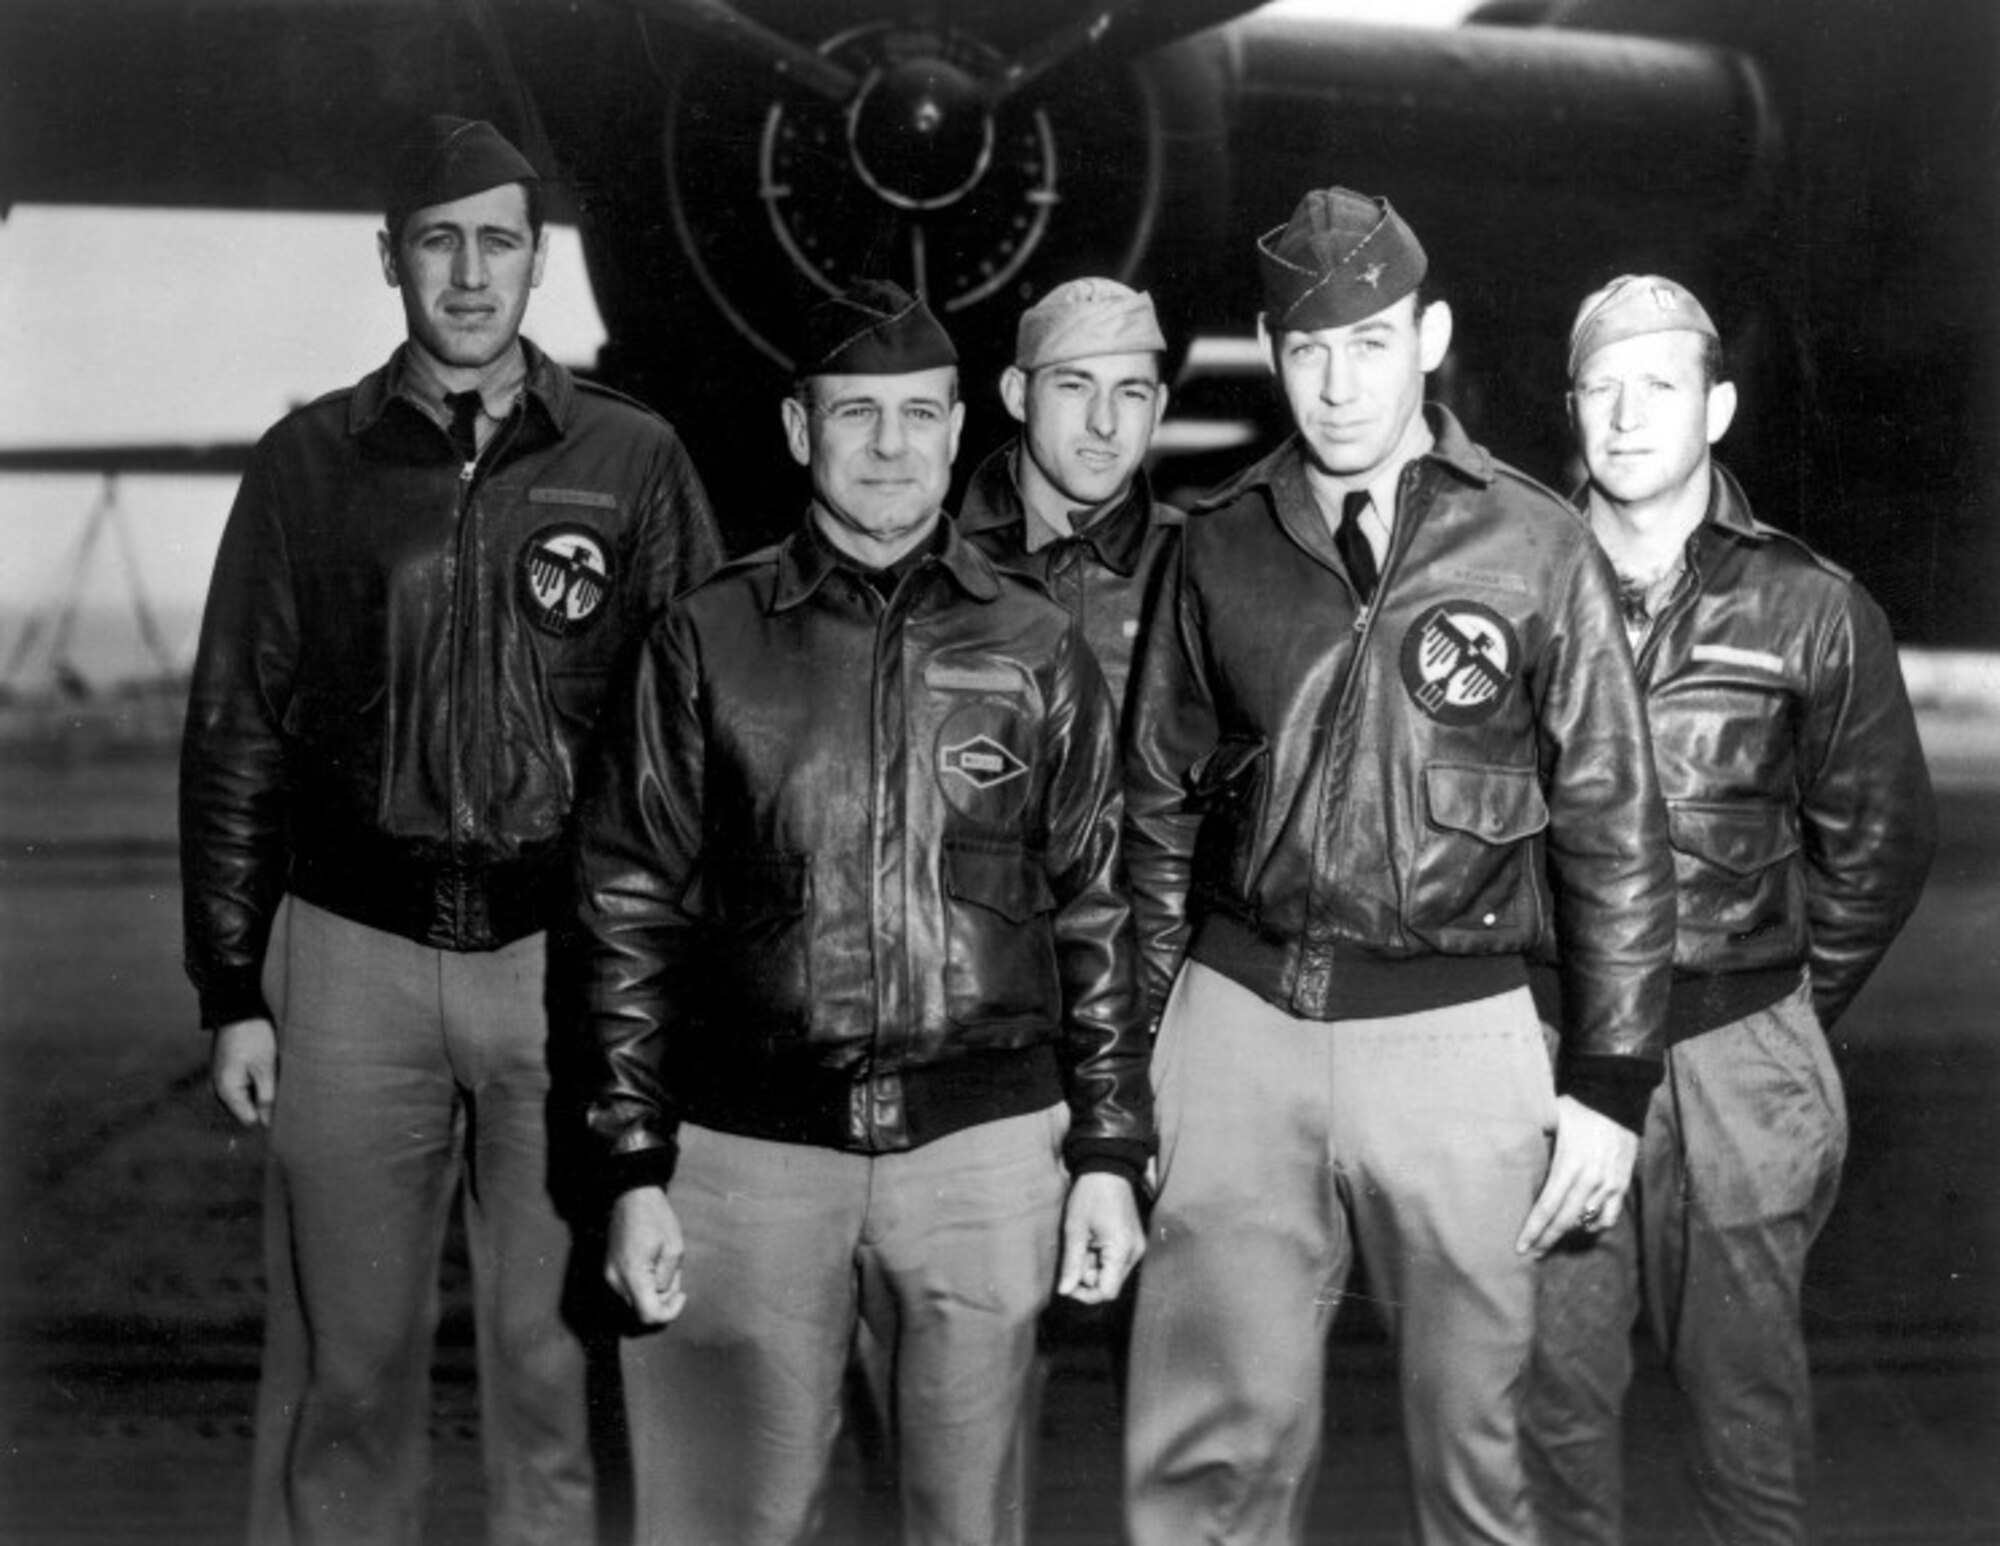 Aircrews for the 16 B-25s were selected from several Army Air Corps squadrons, including the 34th, 37th and 432nd Squadrons. The Doolittle Raid was a total secret to everyone who was involved. When the raiders volunteered, they were told they would be a part of a dangerous secret mission. (U.S. Air Force courtesy photo)